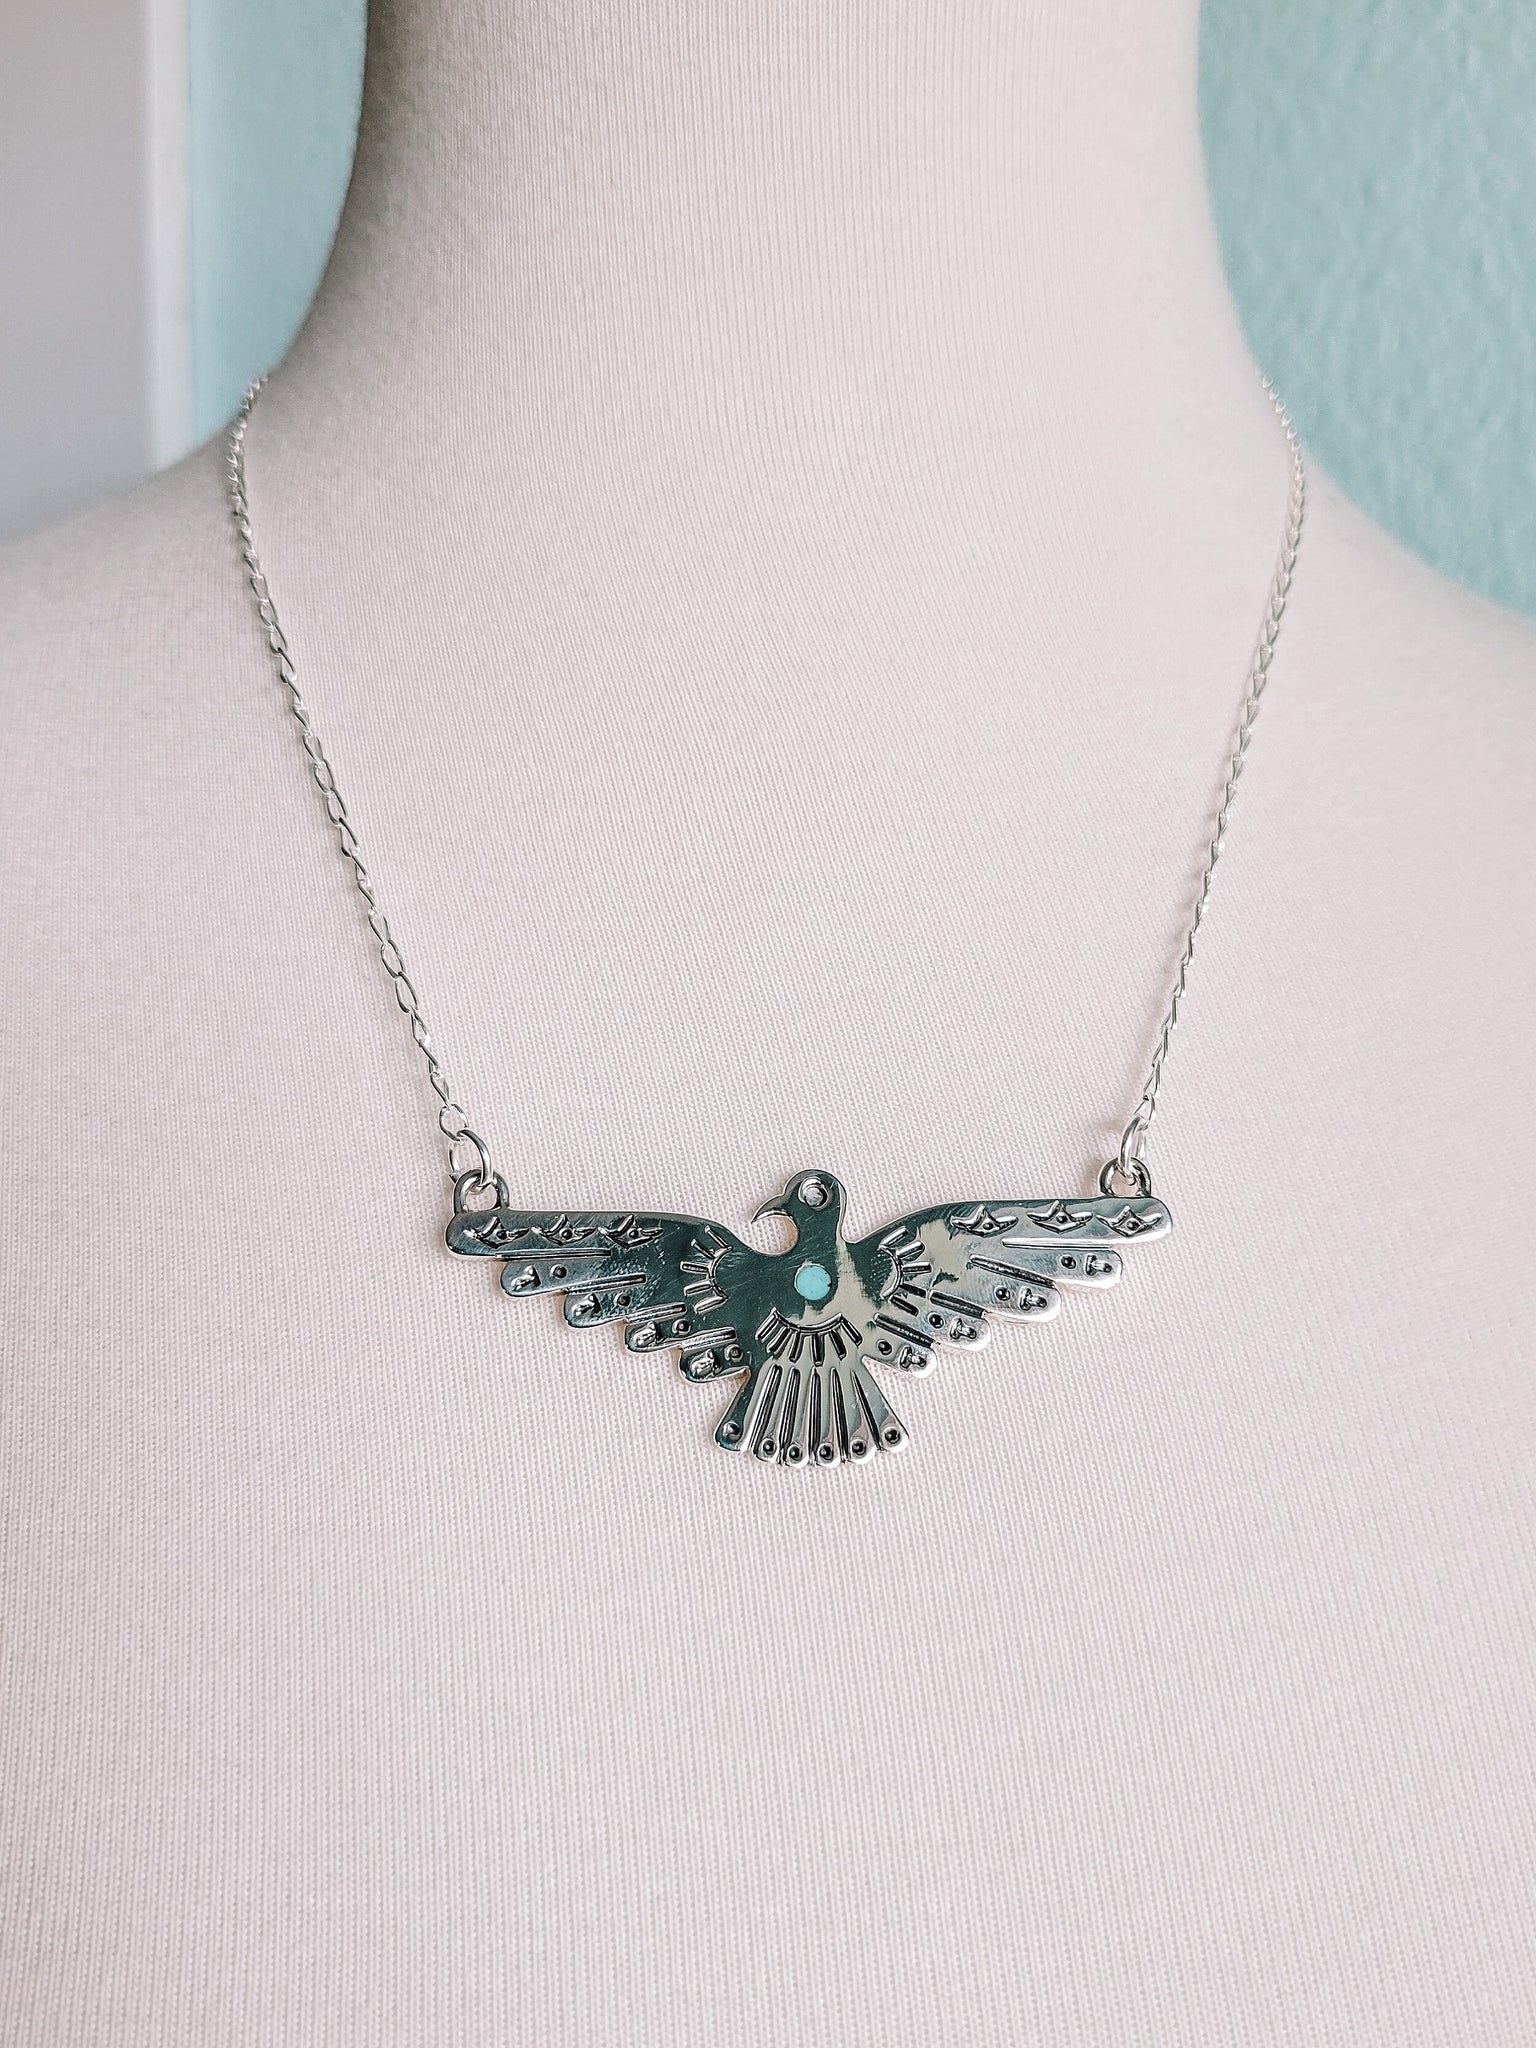 Free Fallin' Authentic Necklace